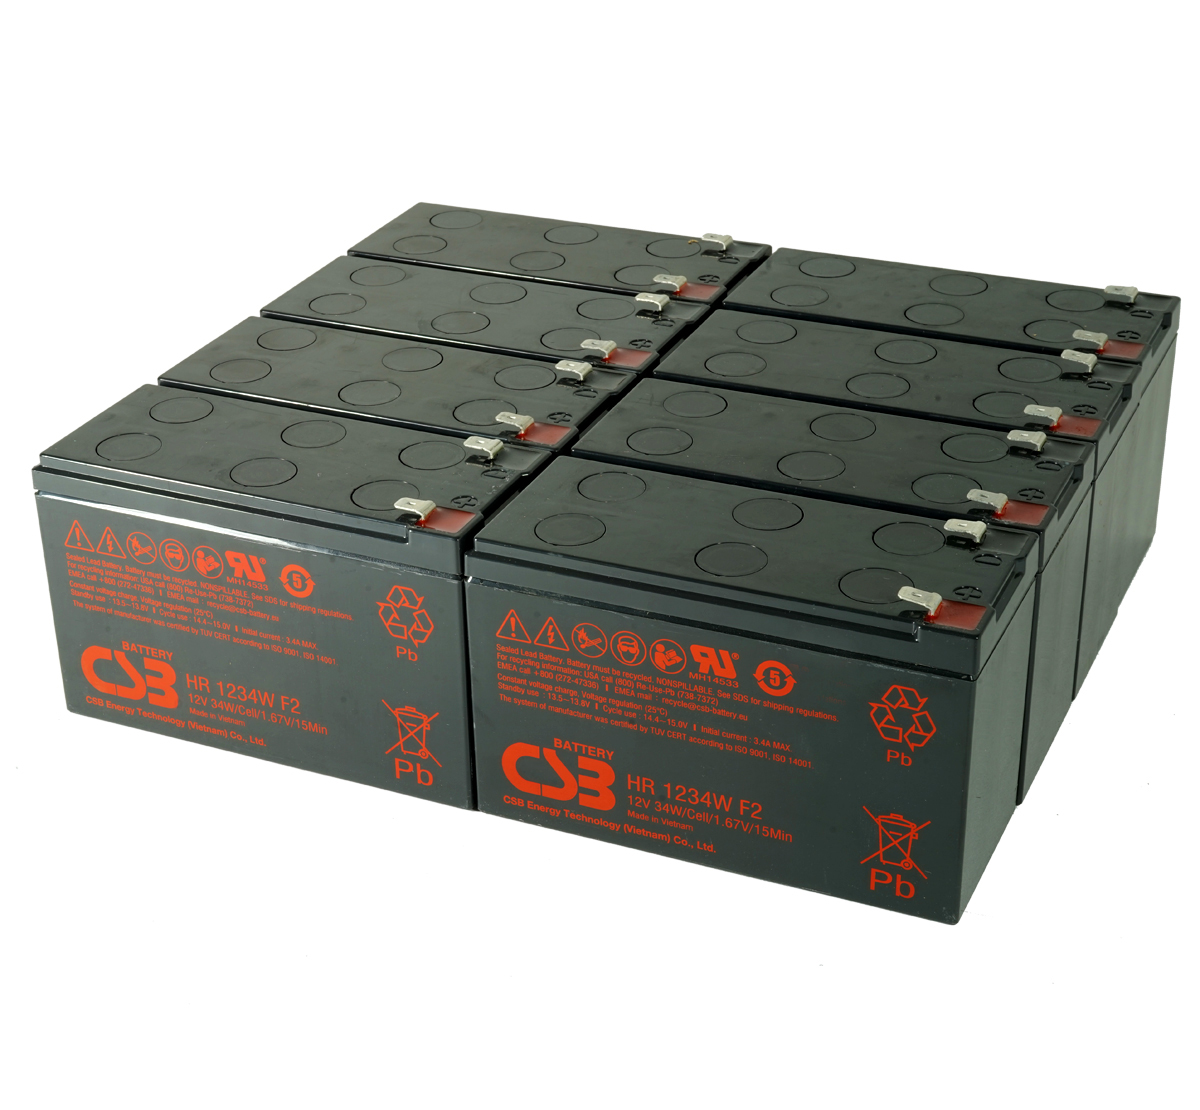 MDS2808 UPS Battery Kit for MGE AB2808